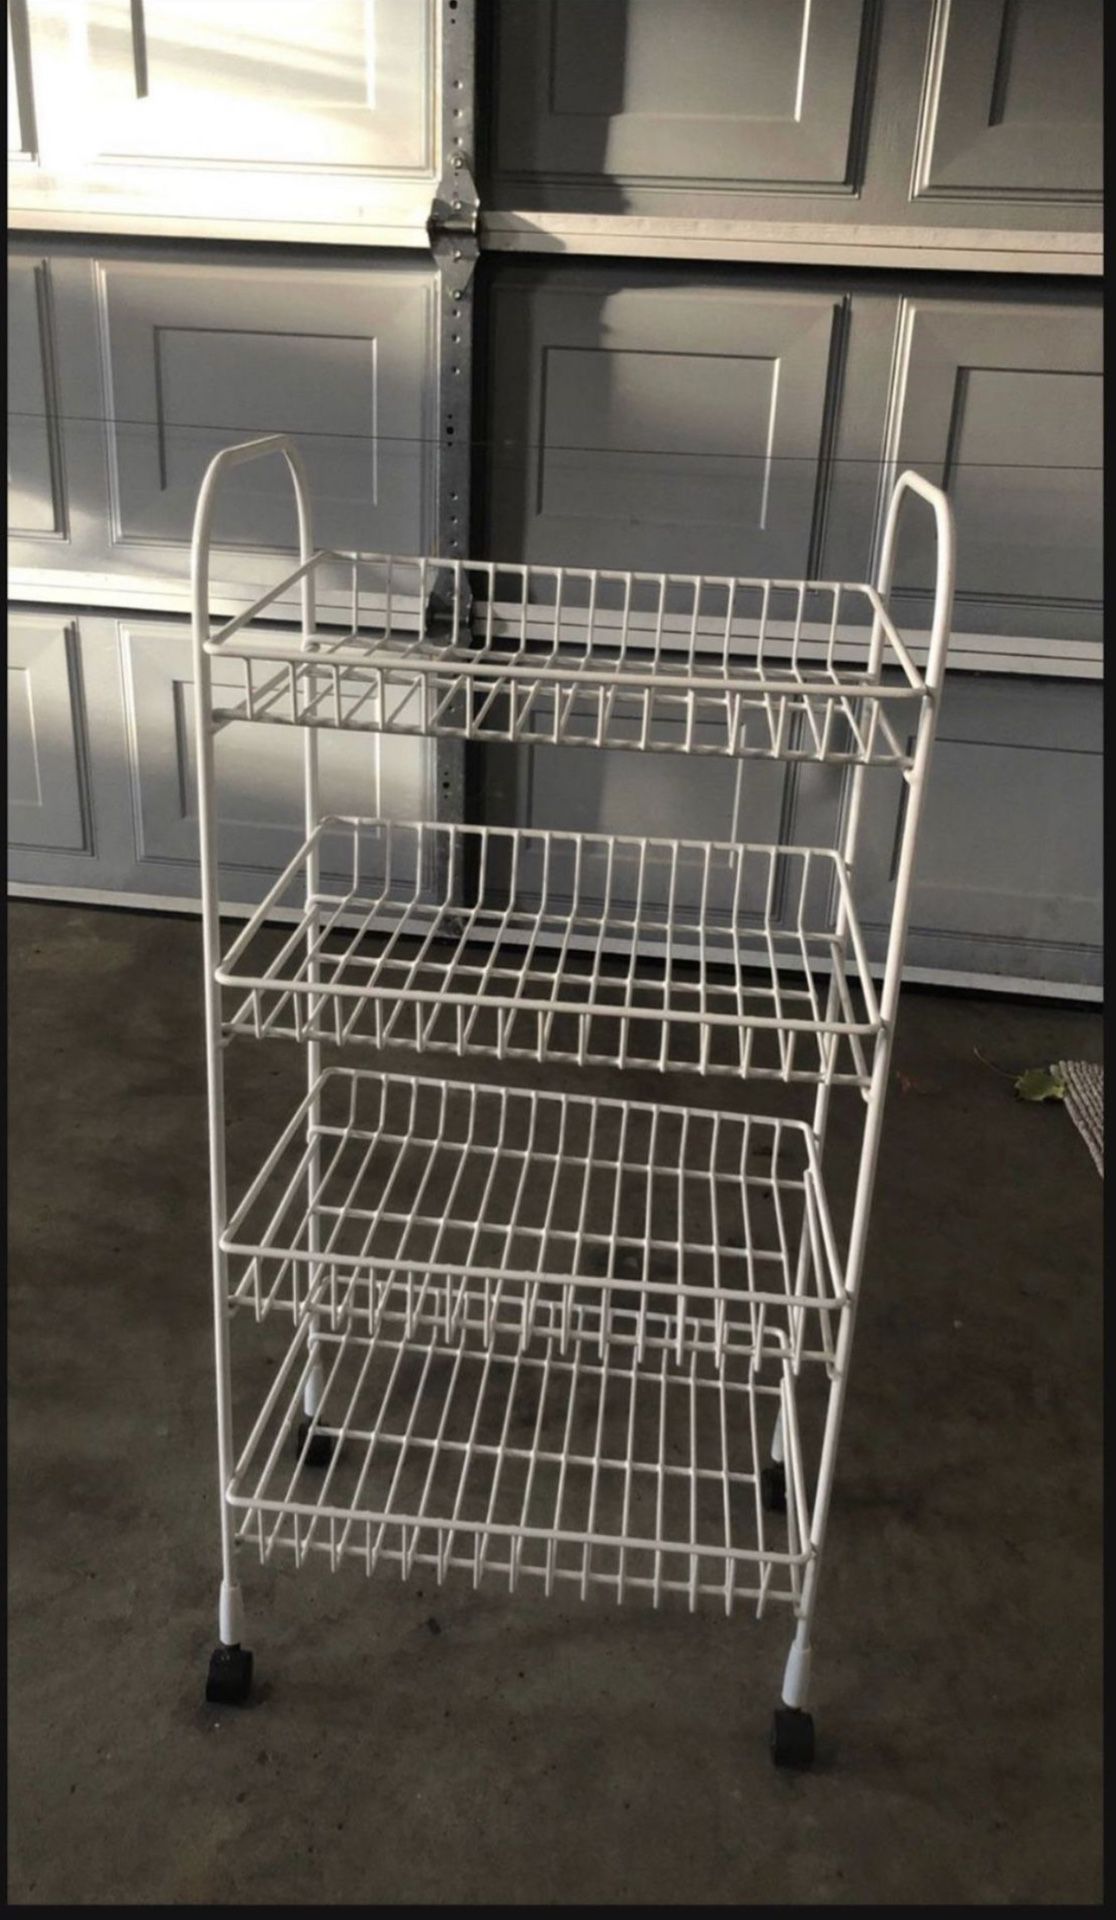 Metal shelves with the wheels